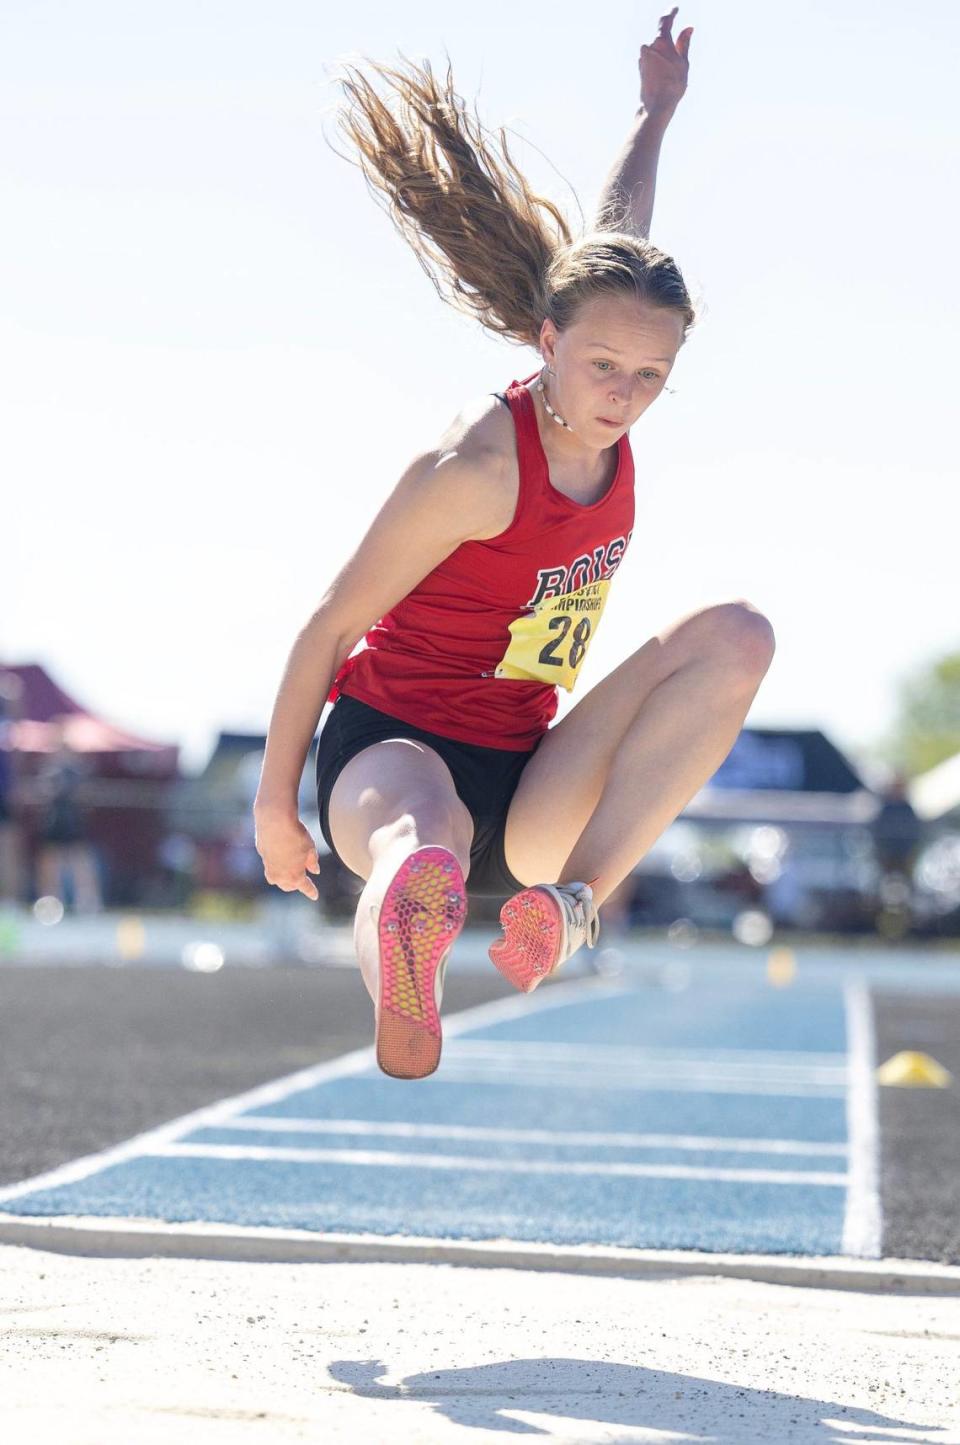 Boise’s Autumn Shomaker competes in triple jump at the 5A District Three Track and Field Championships last week. She’s a favorite to win the long jump title at state.